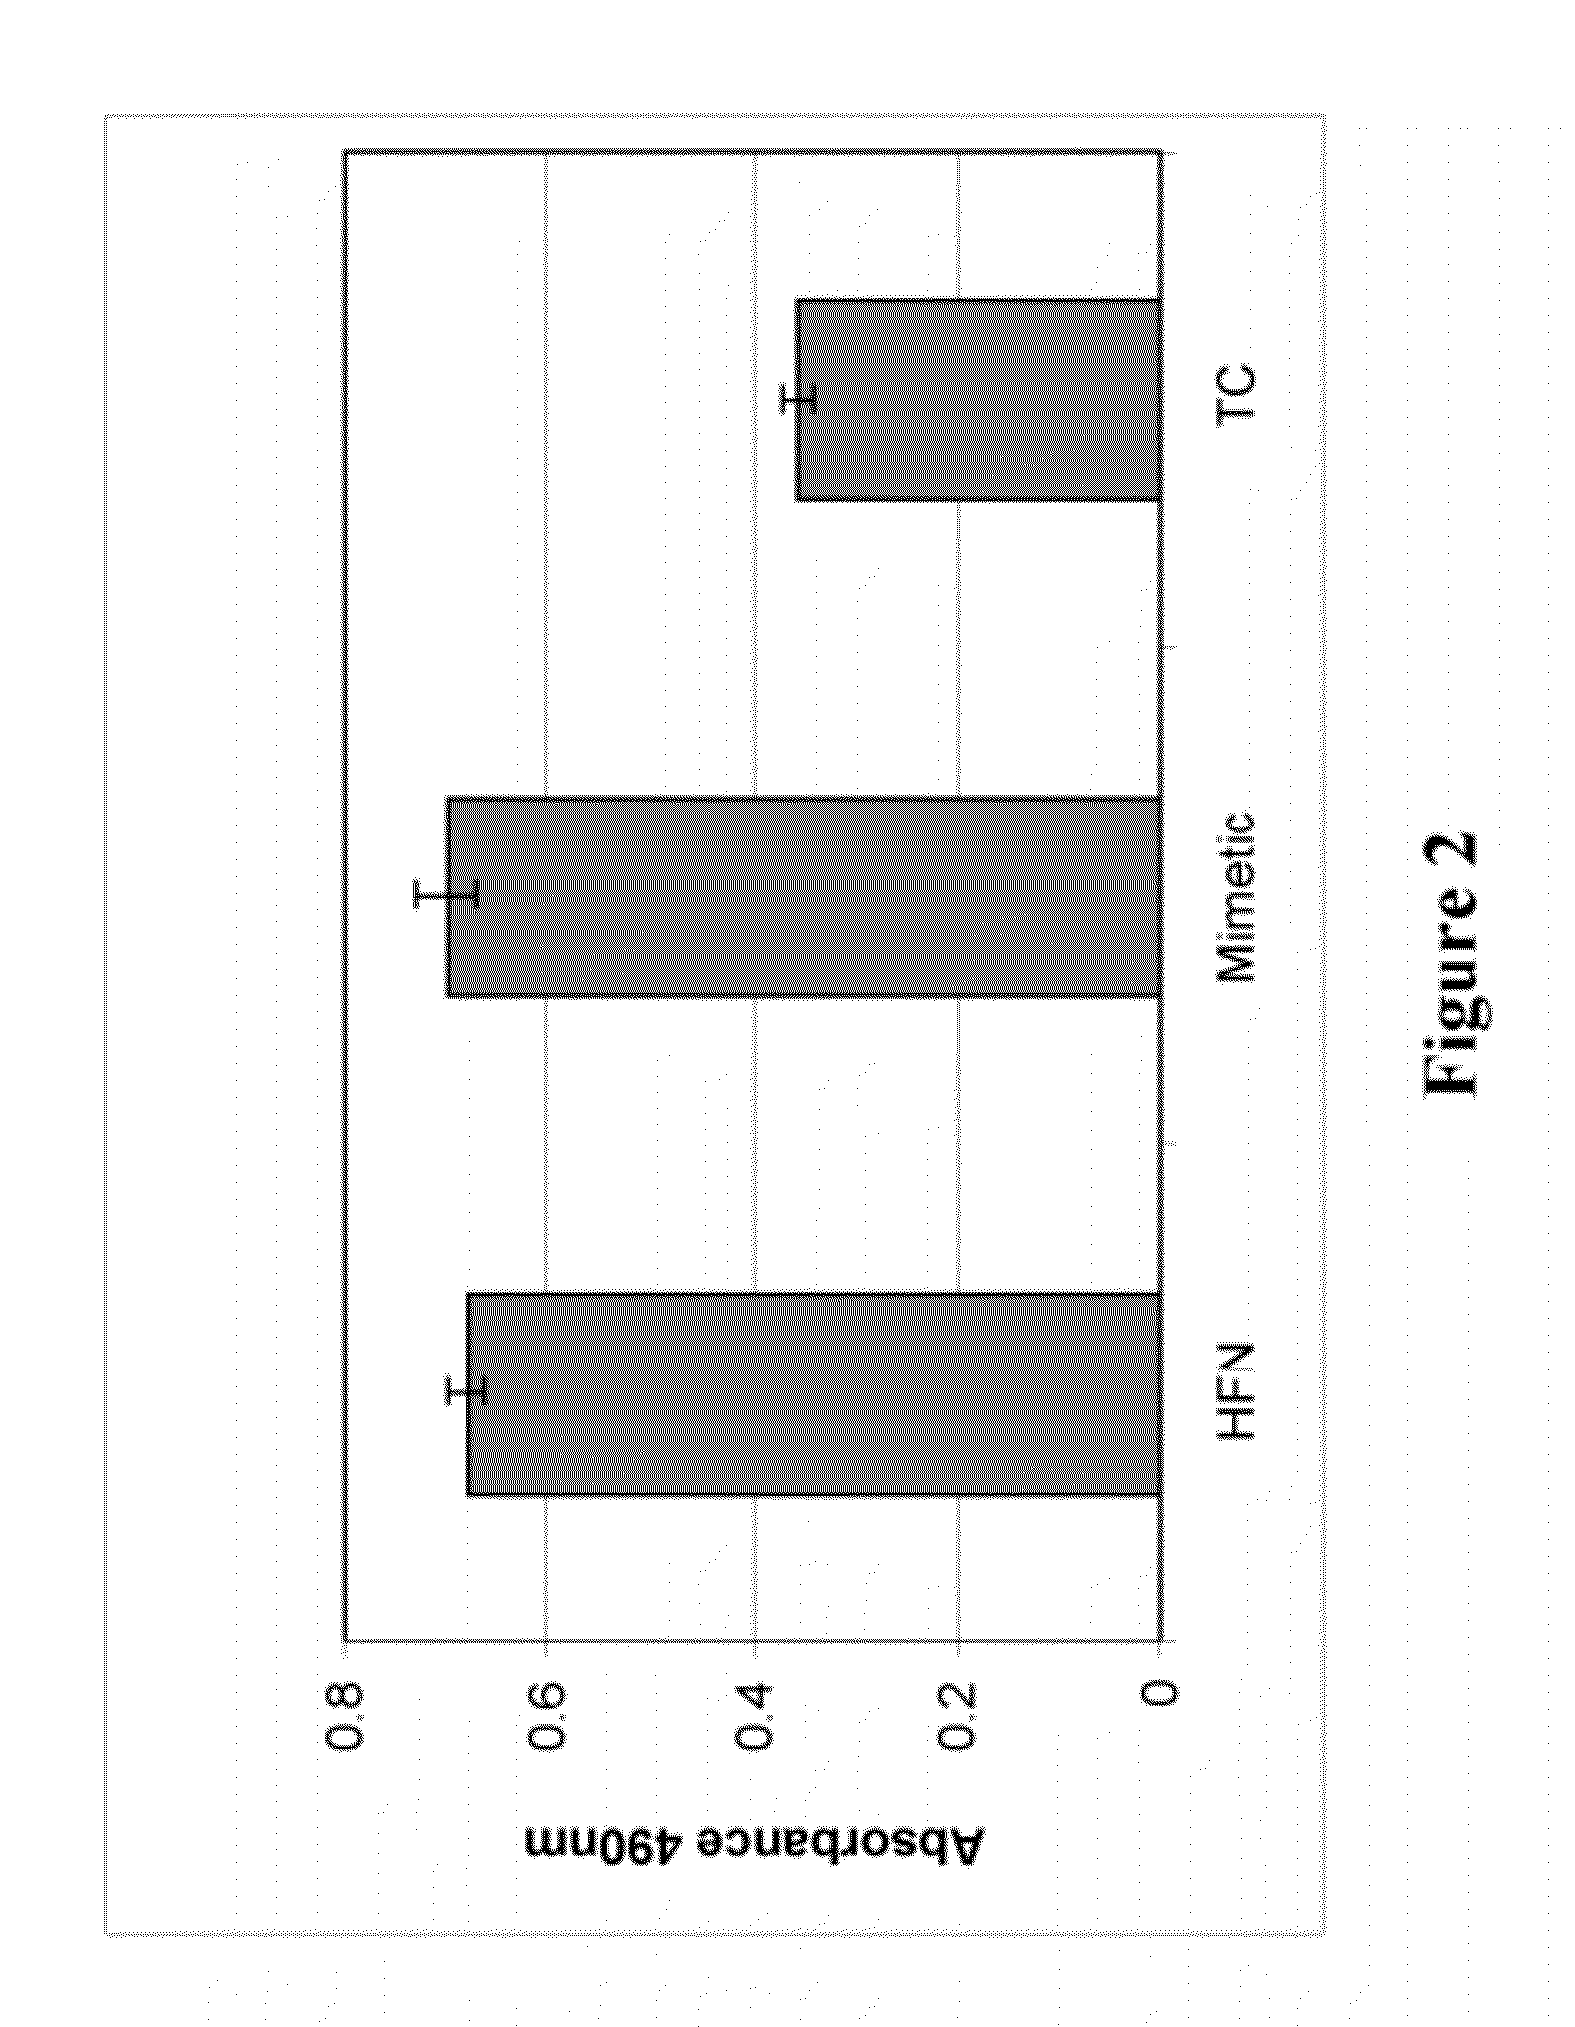 Synthetic, Defined Fibronectin Mimetic Peptides And Surfaces Modified With The Same